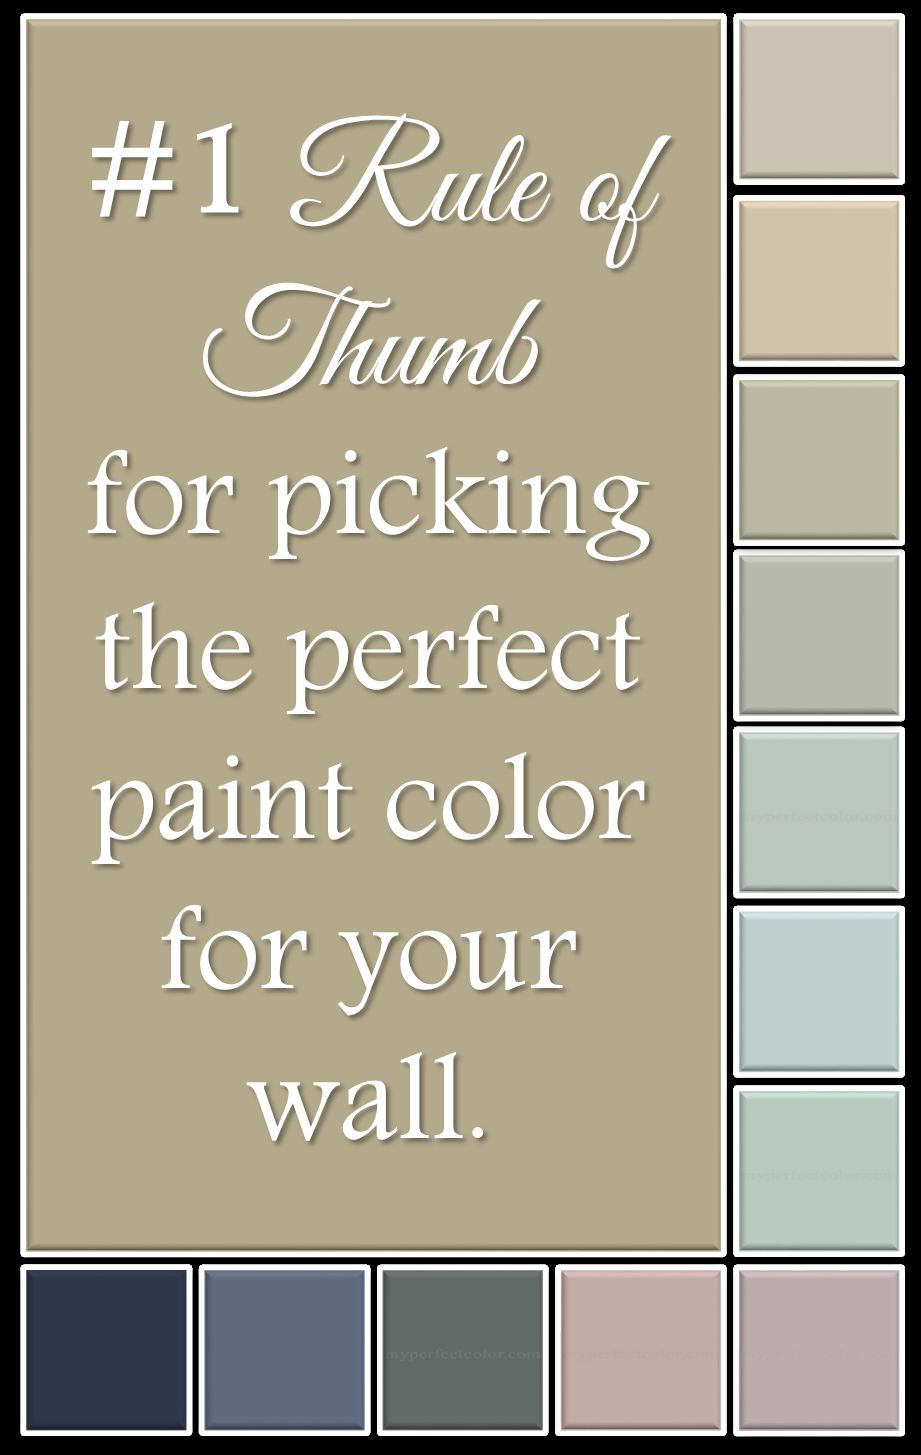 How to get the right paint color